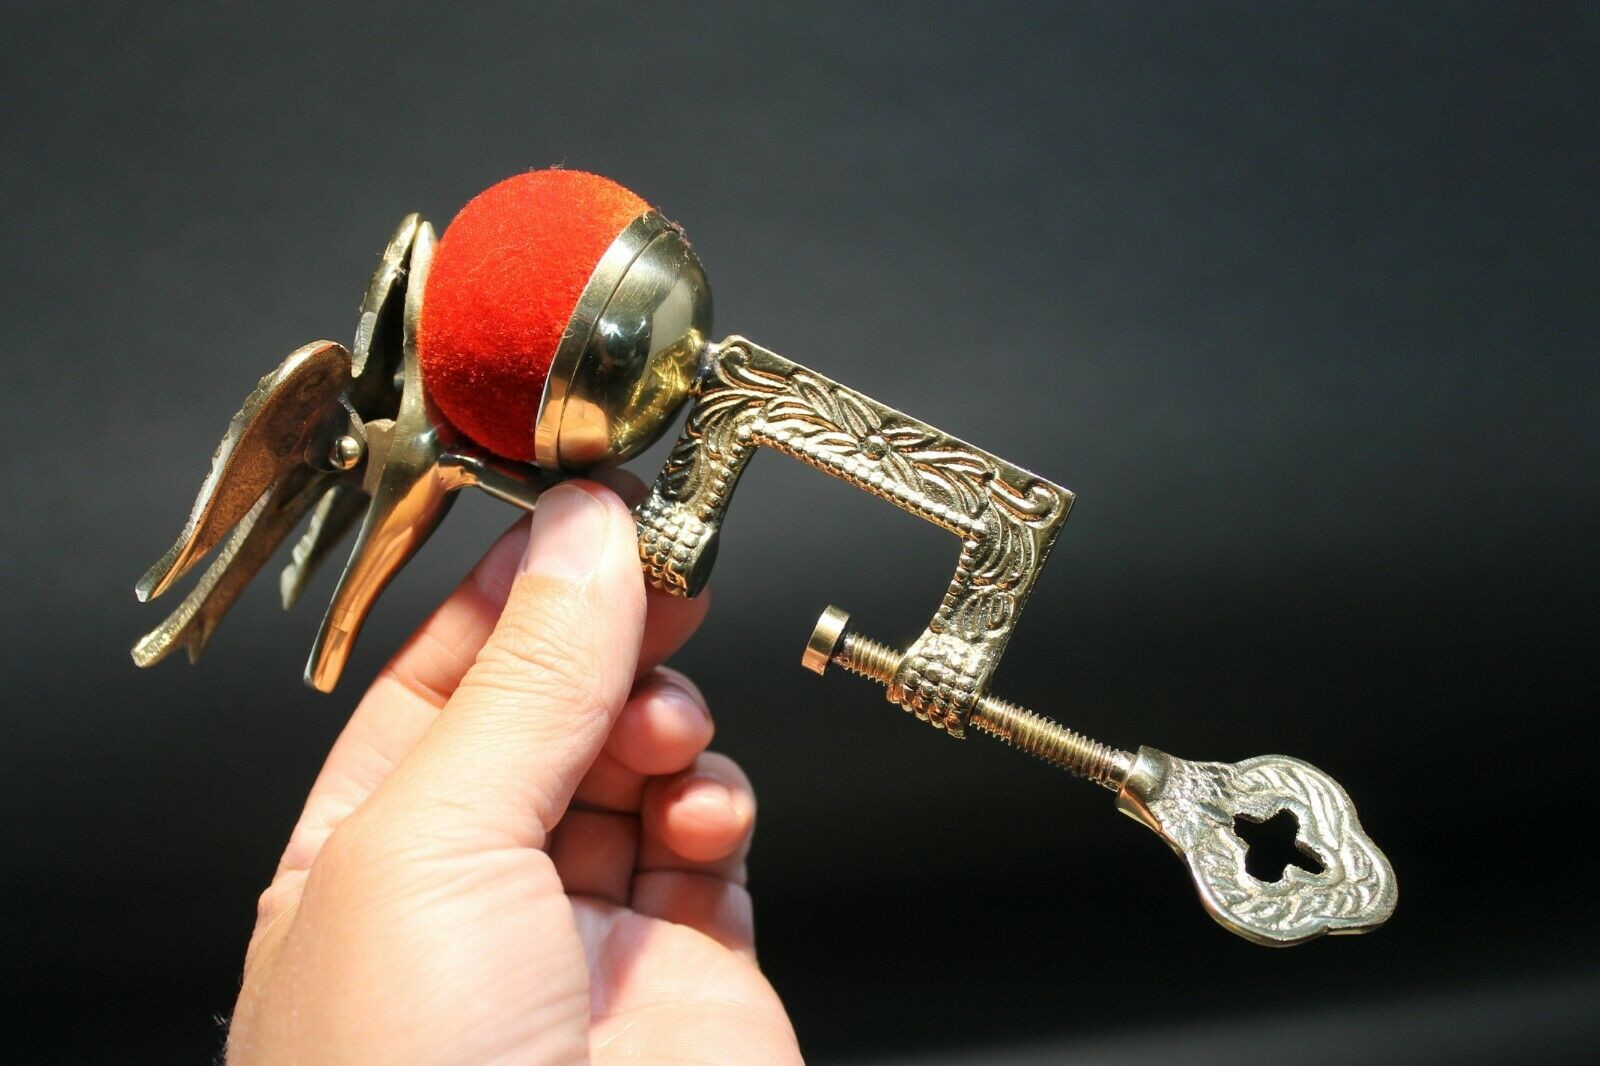 Antique Style Ornate Brass Sewing Clamp Pin Cushion w Bird Clip - Early Home Decor